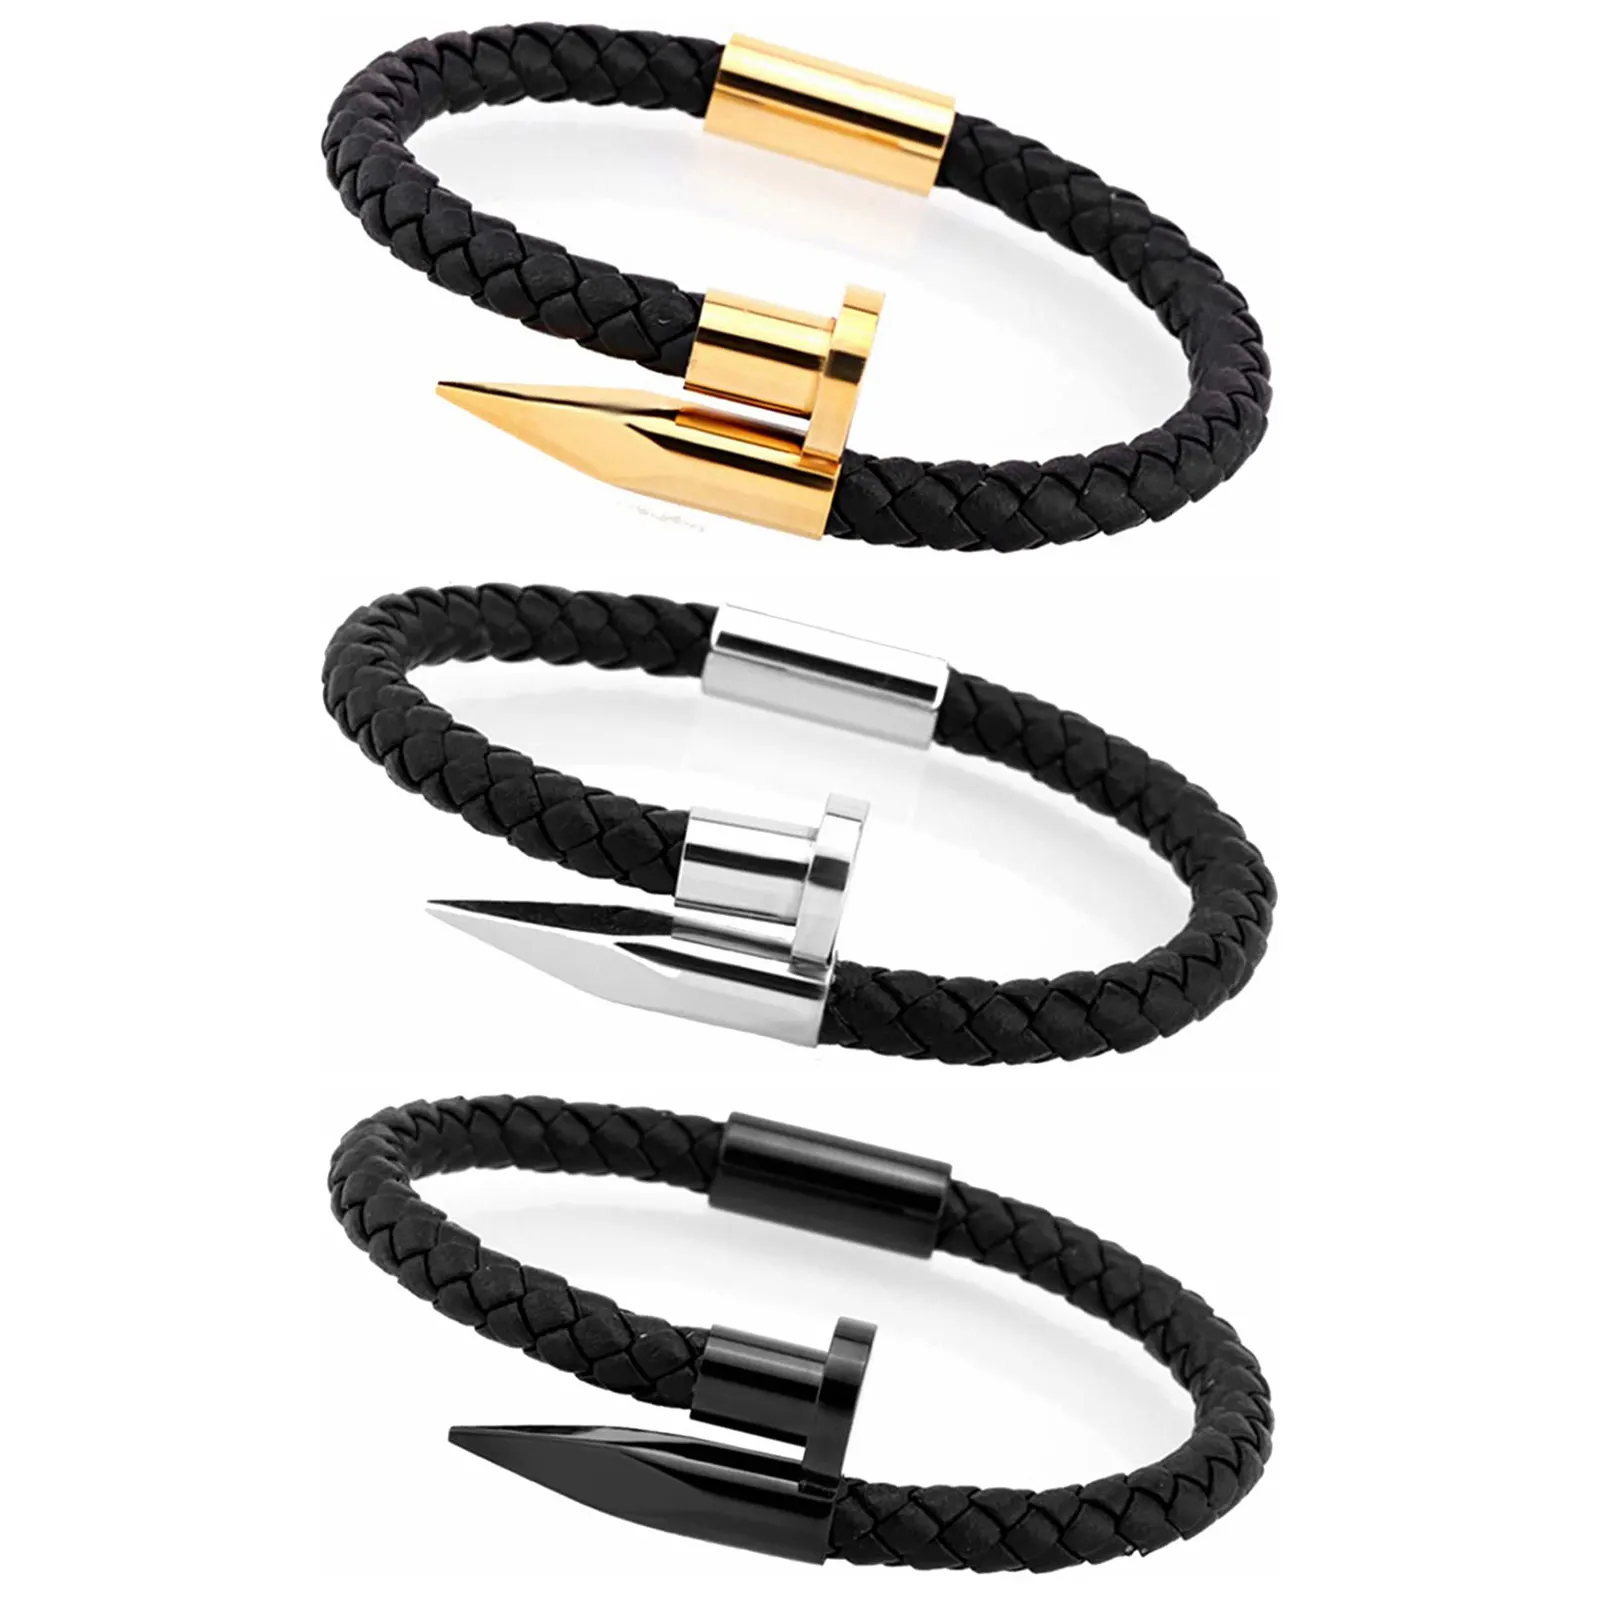 Braided Leather Nail Bracelet for Men Women Stainless Steel Charm Cuff Wristband Bangle Black Popper Jewelry